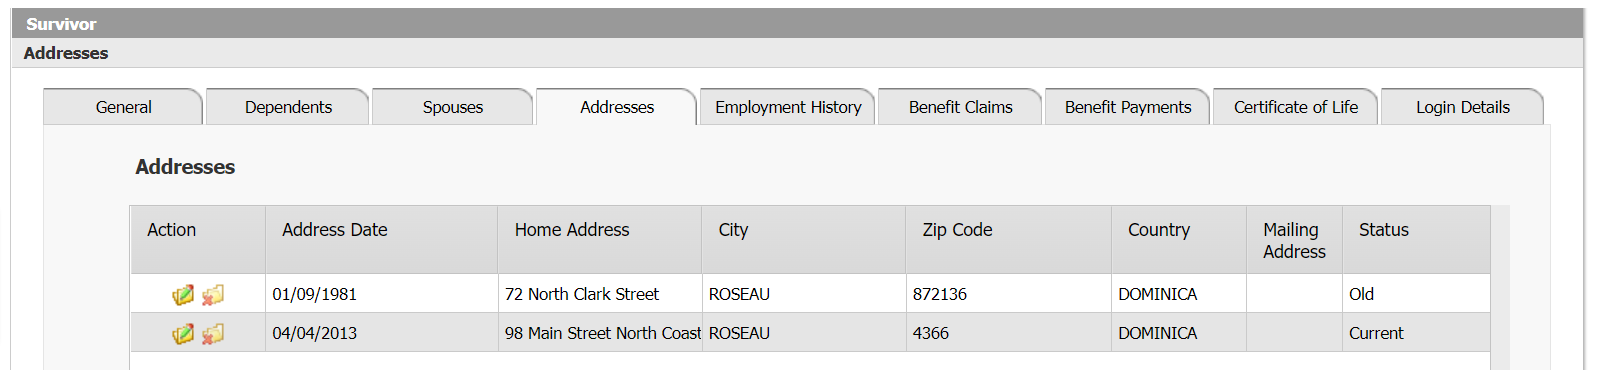 Figure-227: Interact Compensation and Payroll